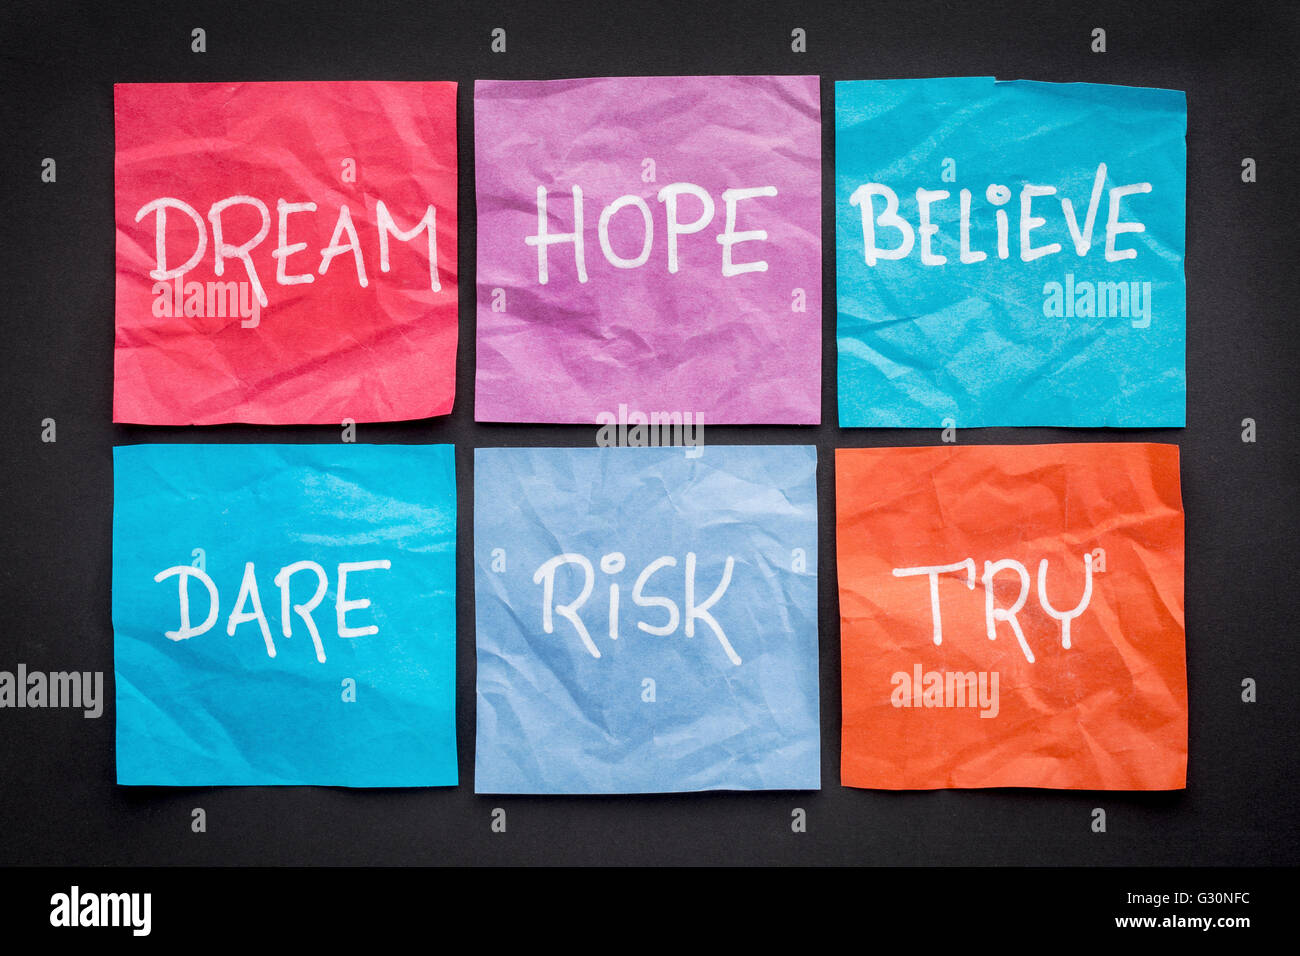 dream, hope, believe, dare, risk, and try - motivational concept - a set of crumpled sticky notes with white handwritten text ag Stock Photo